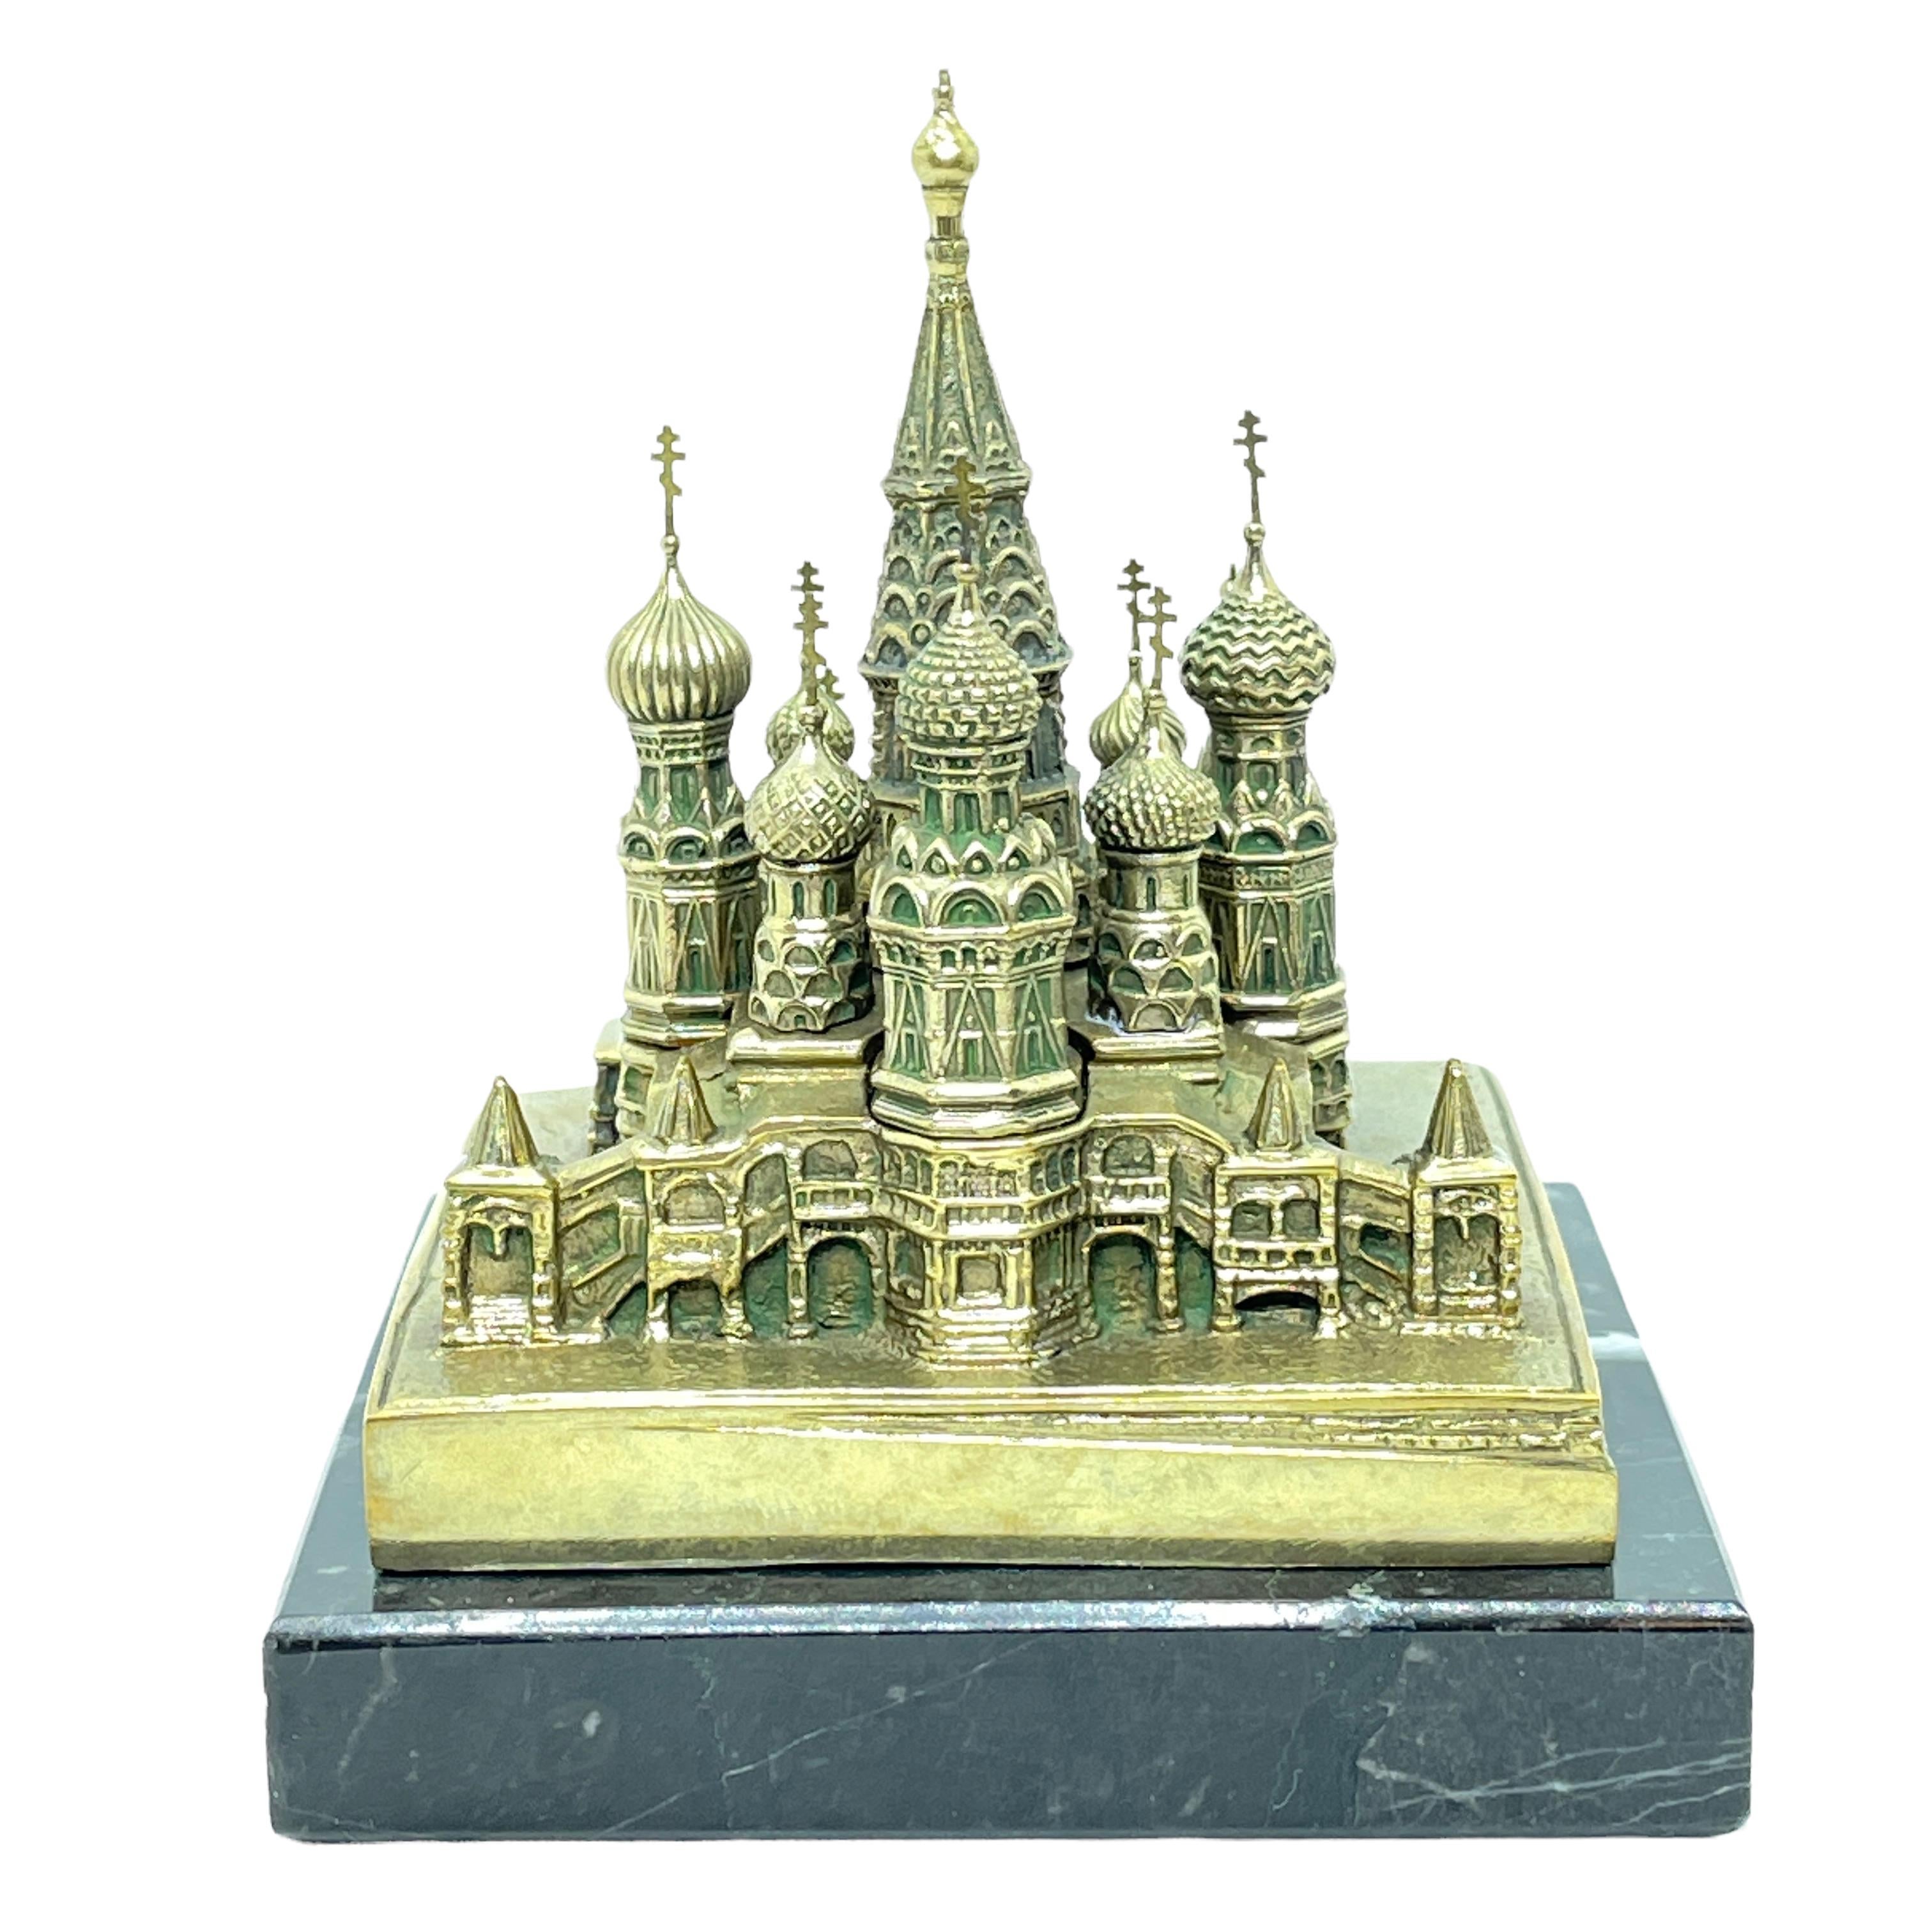 Stunning bronze on marble miniature replica of St. Basil's Cathedral in Moscow, probably the most famous building in all Russia, built by Czar Ivan the Terrible in the 16th century. This souvenir building was made in the former Soviet Union in 1970,